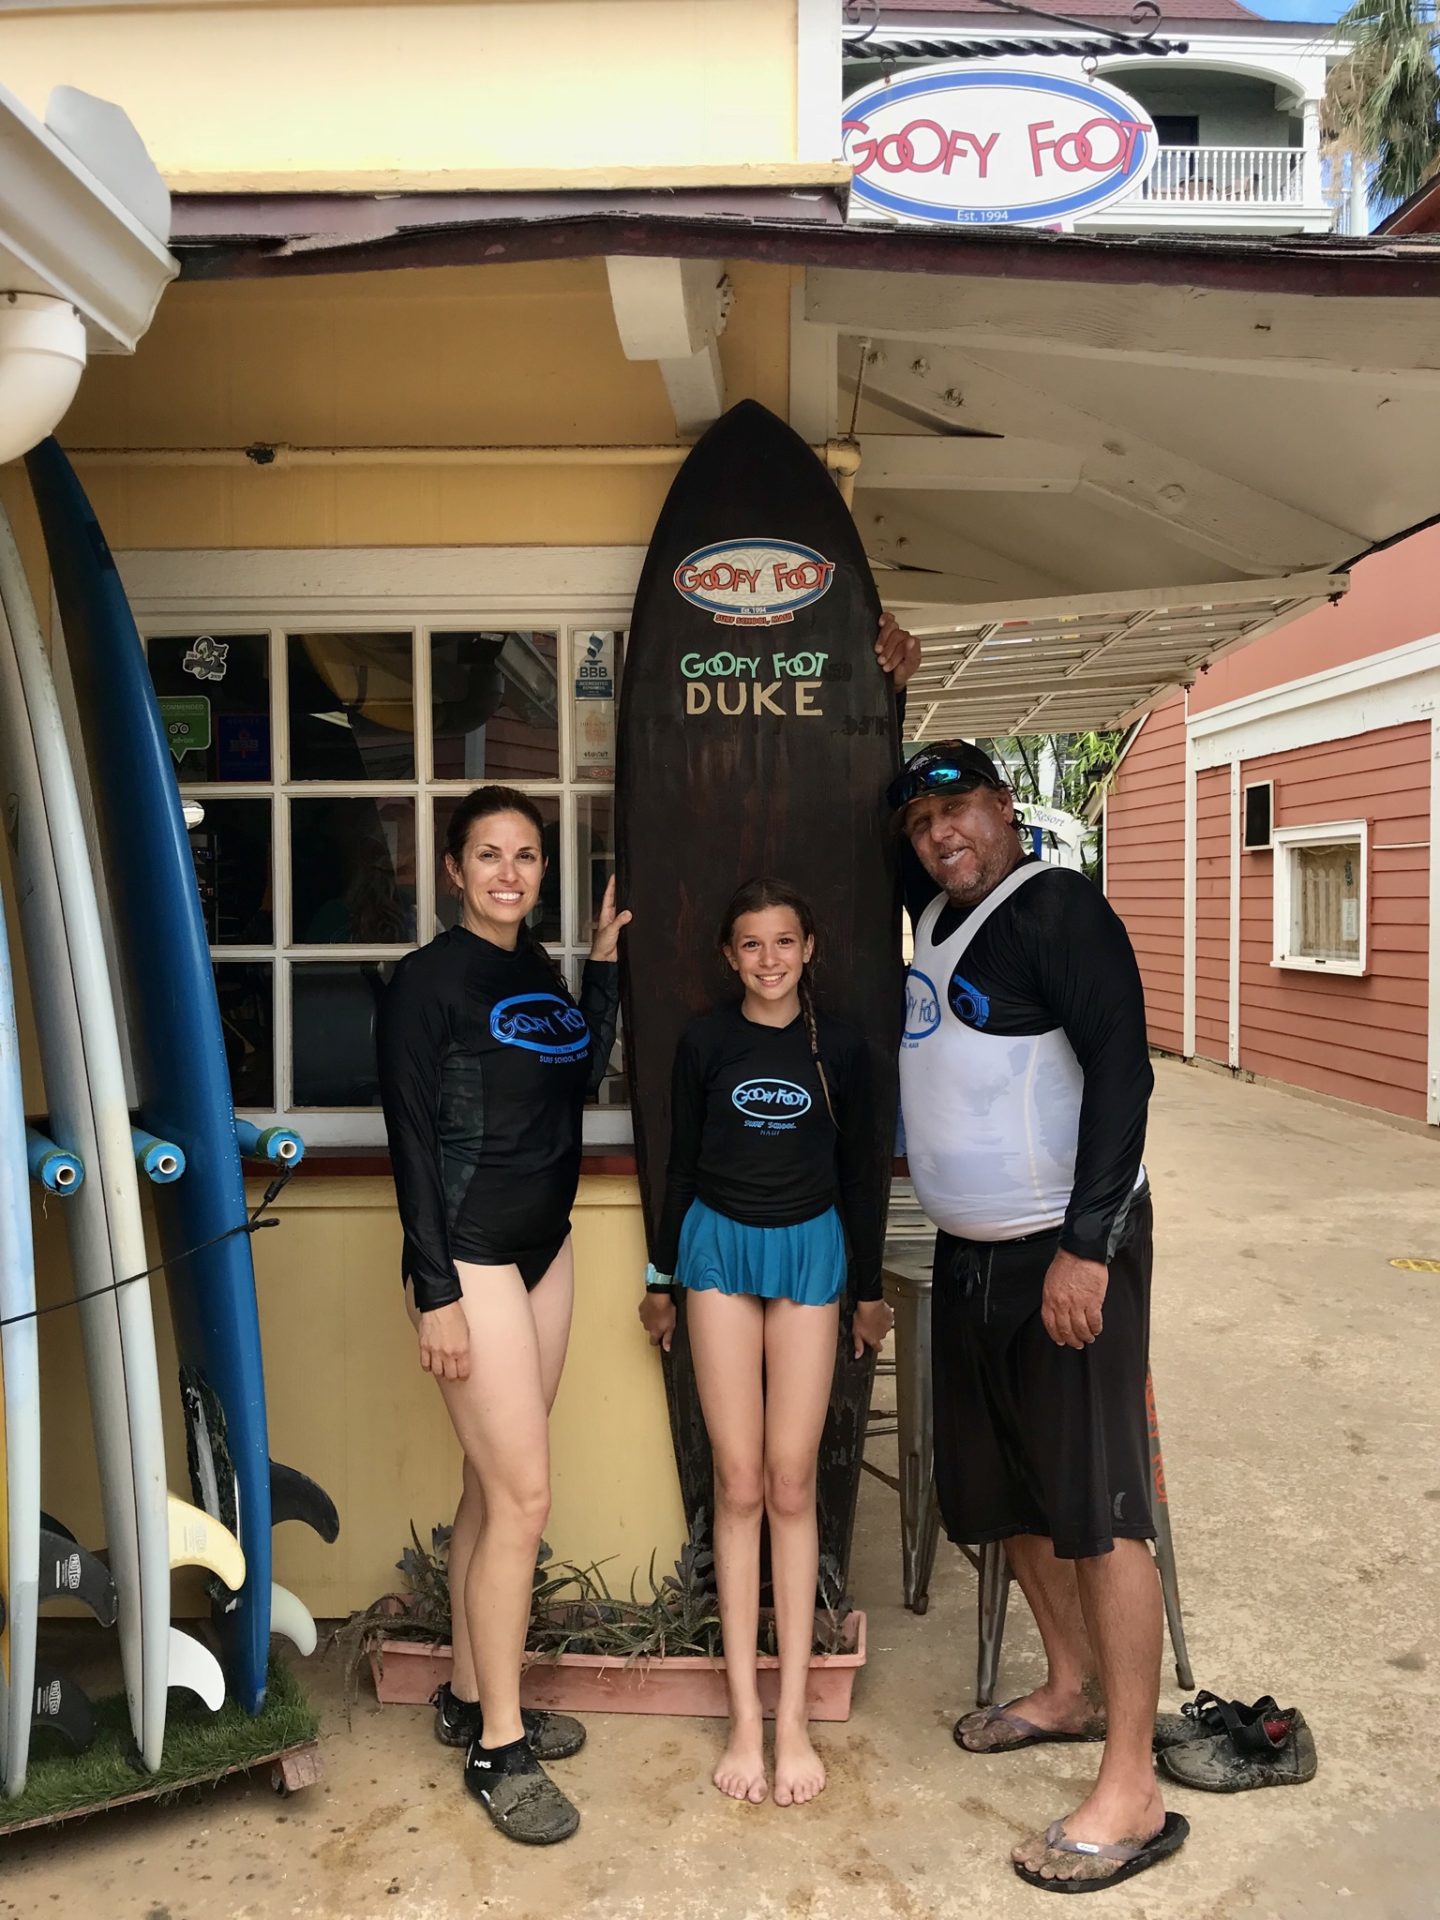 What an awesome experience to surf for the first time! Grace and I both loved it and can’t wait to do it again!